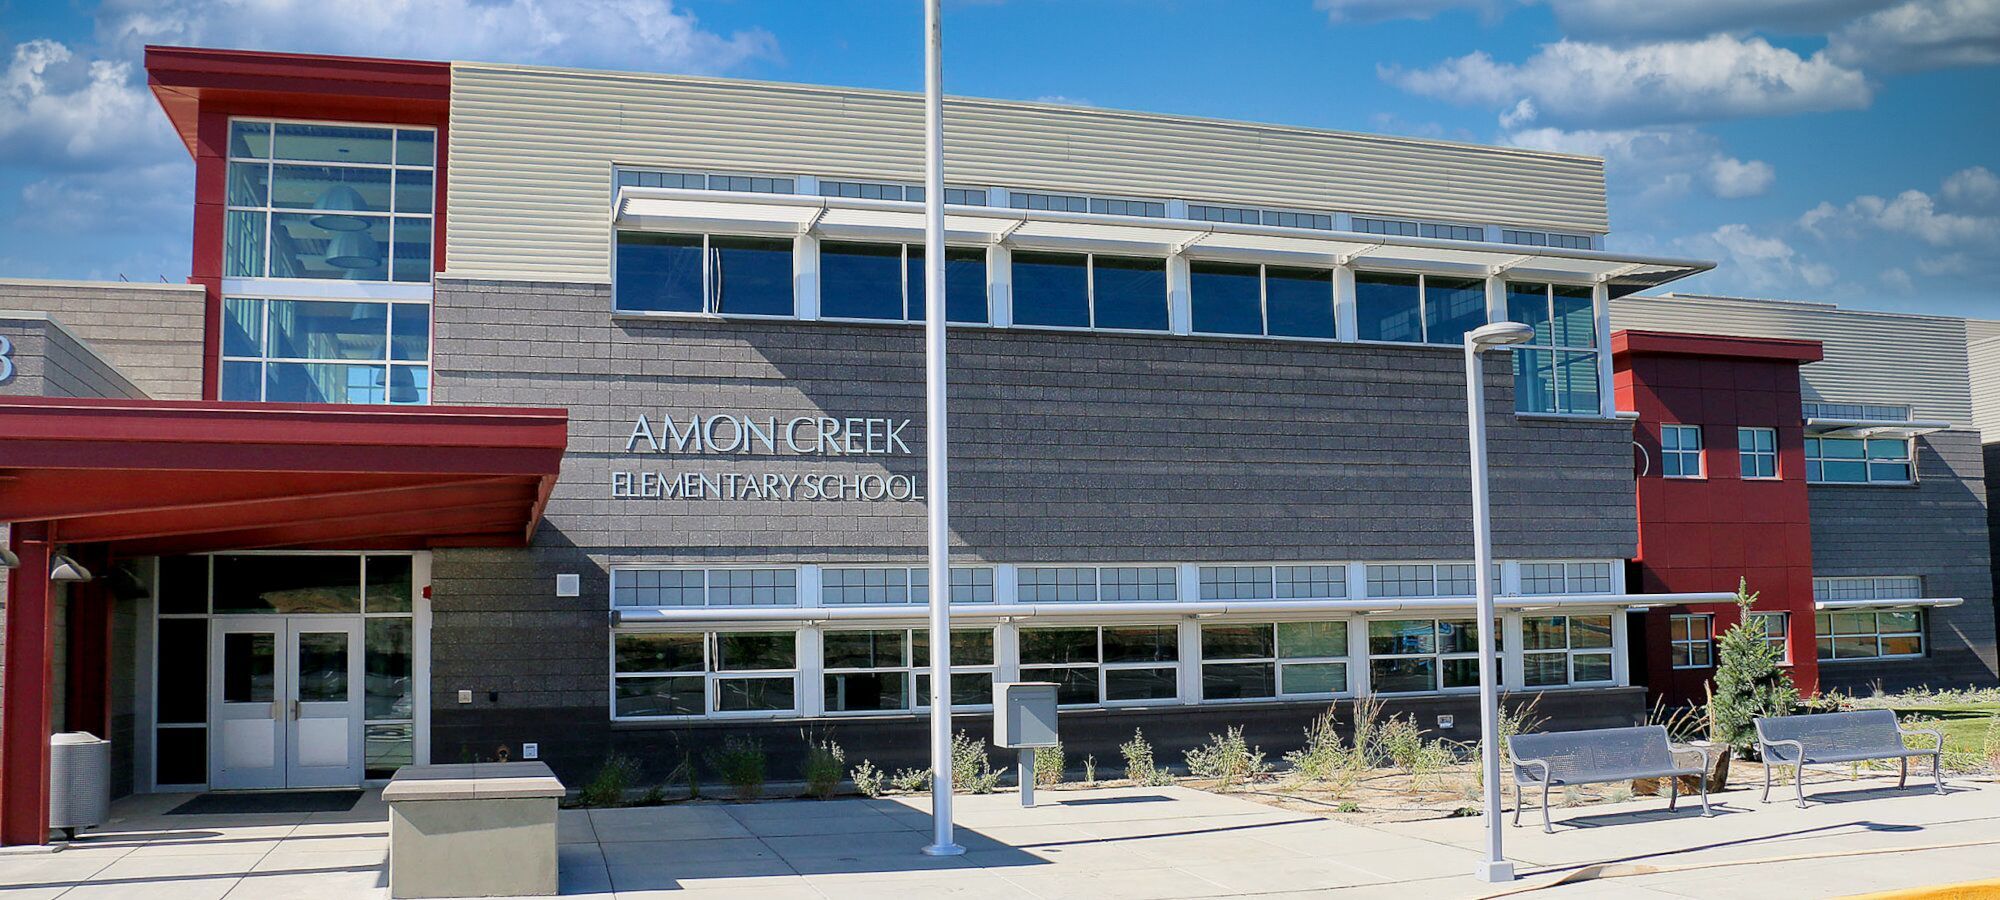 Amon Creek Elementary School Homes for Sale and Information in the Kennewick School District in Washington State